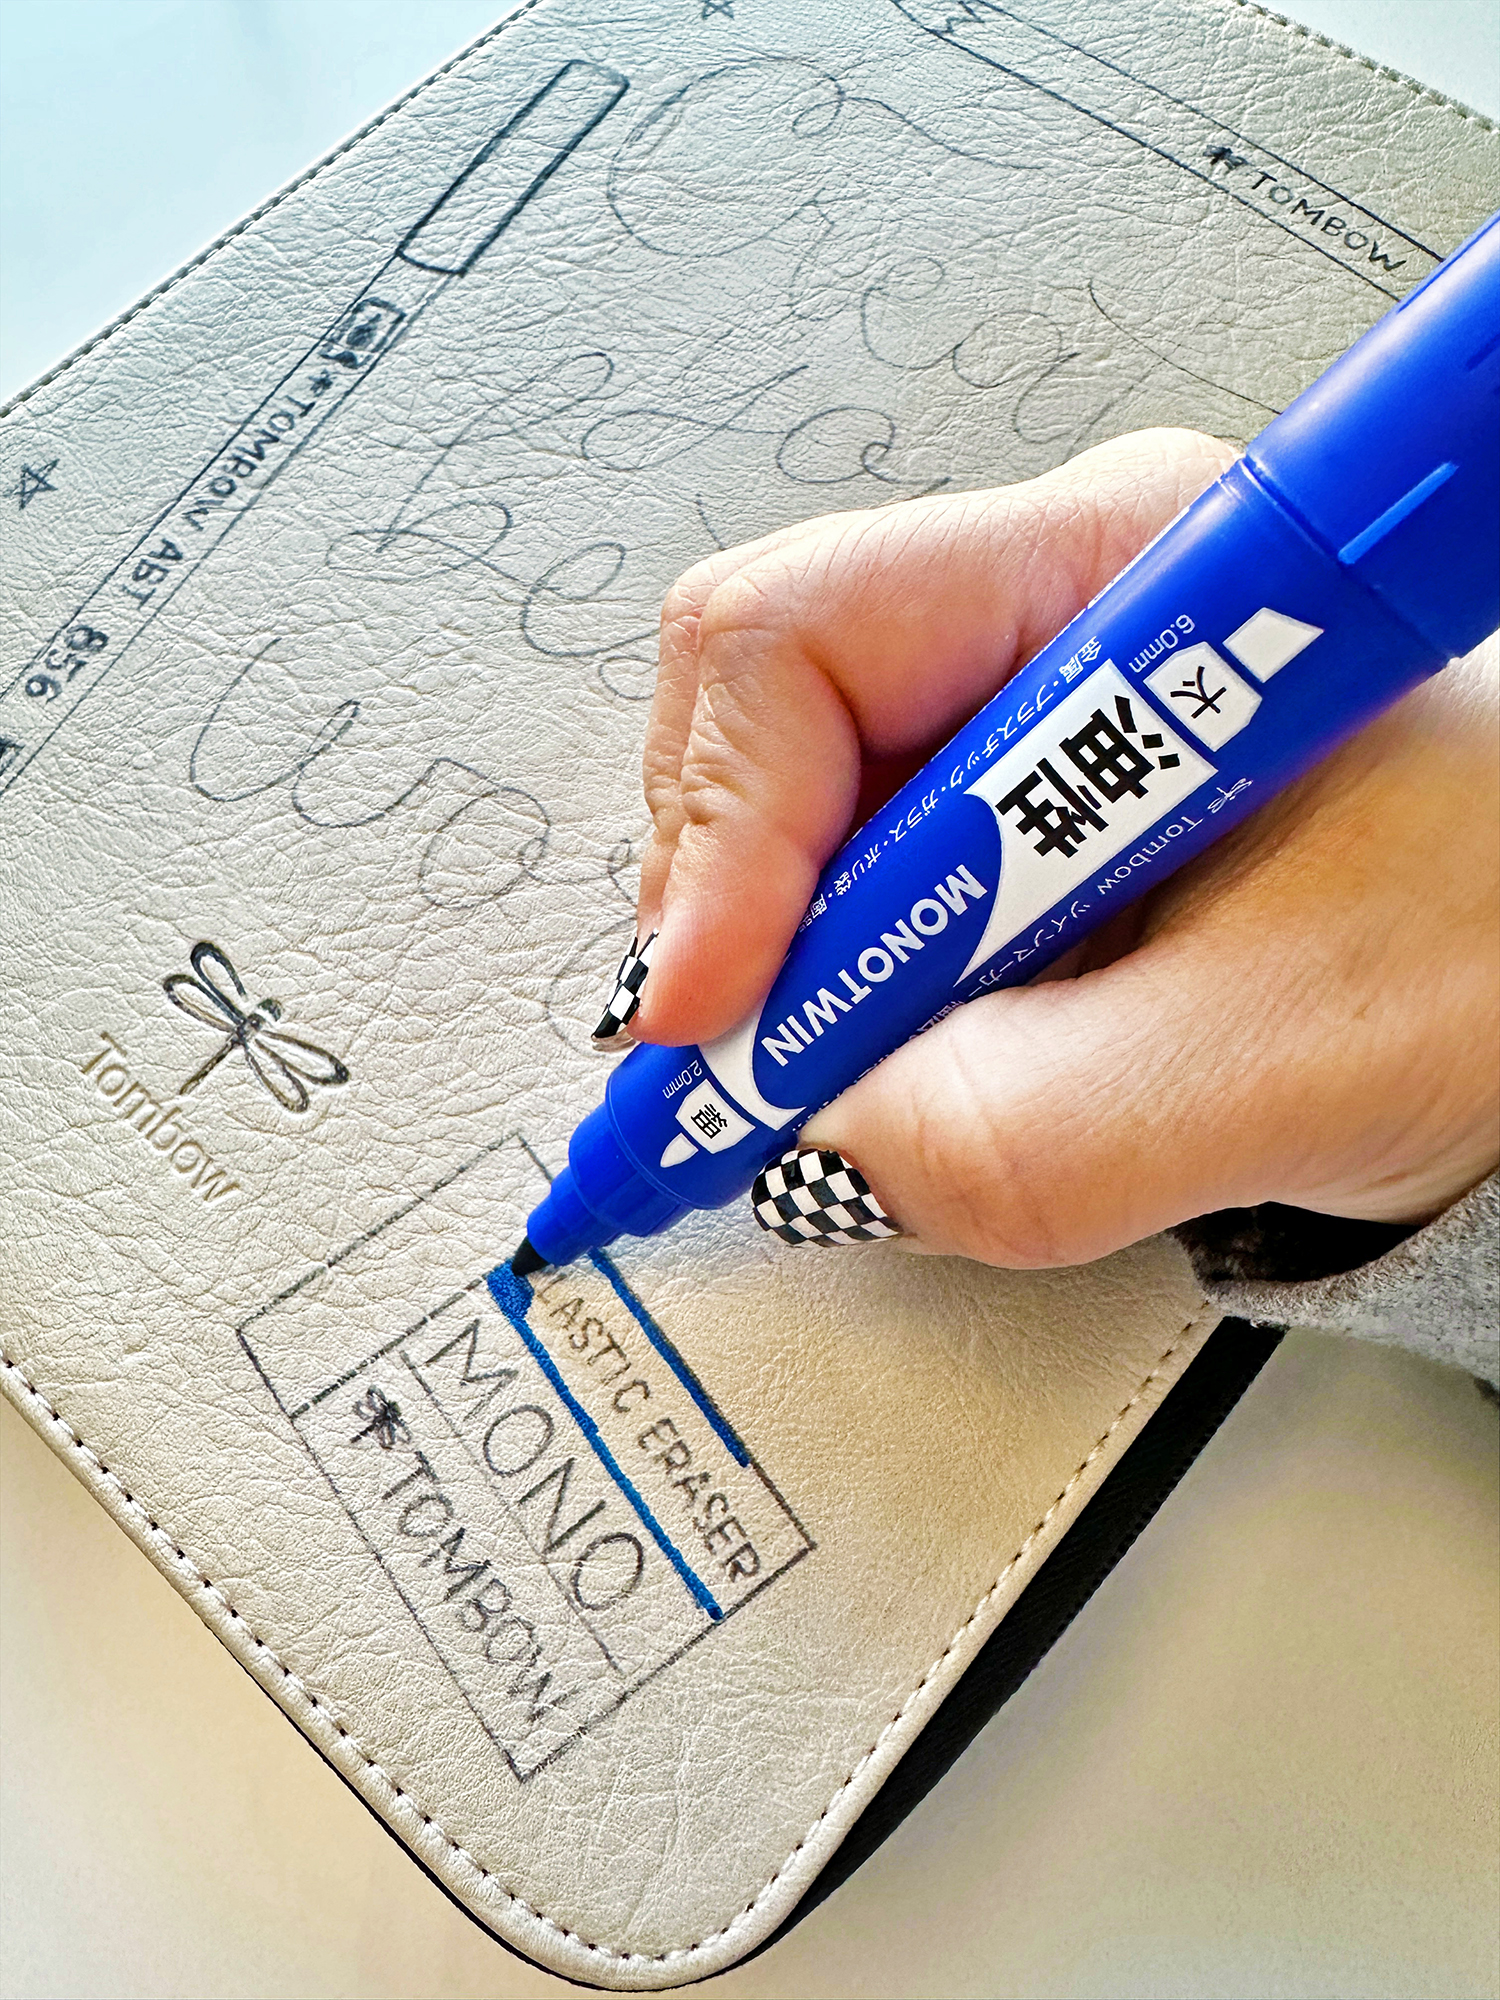 Use the Tombow MONO Twin Permanent Markers to customize the Tombow Zippered Marker Storage Case. #tombow #doodling